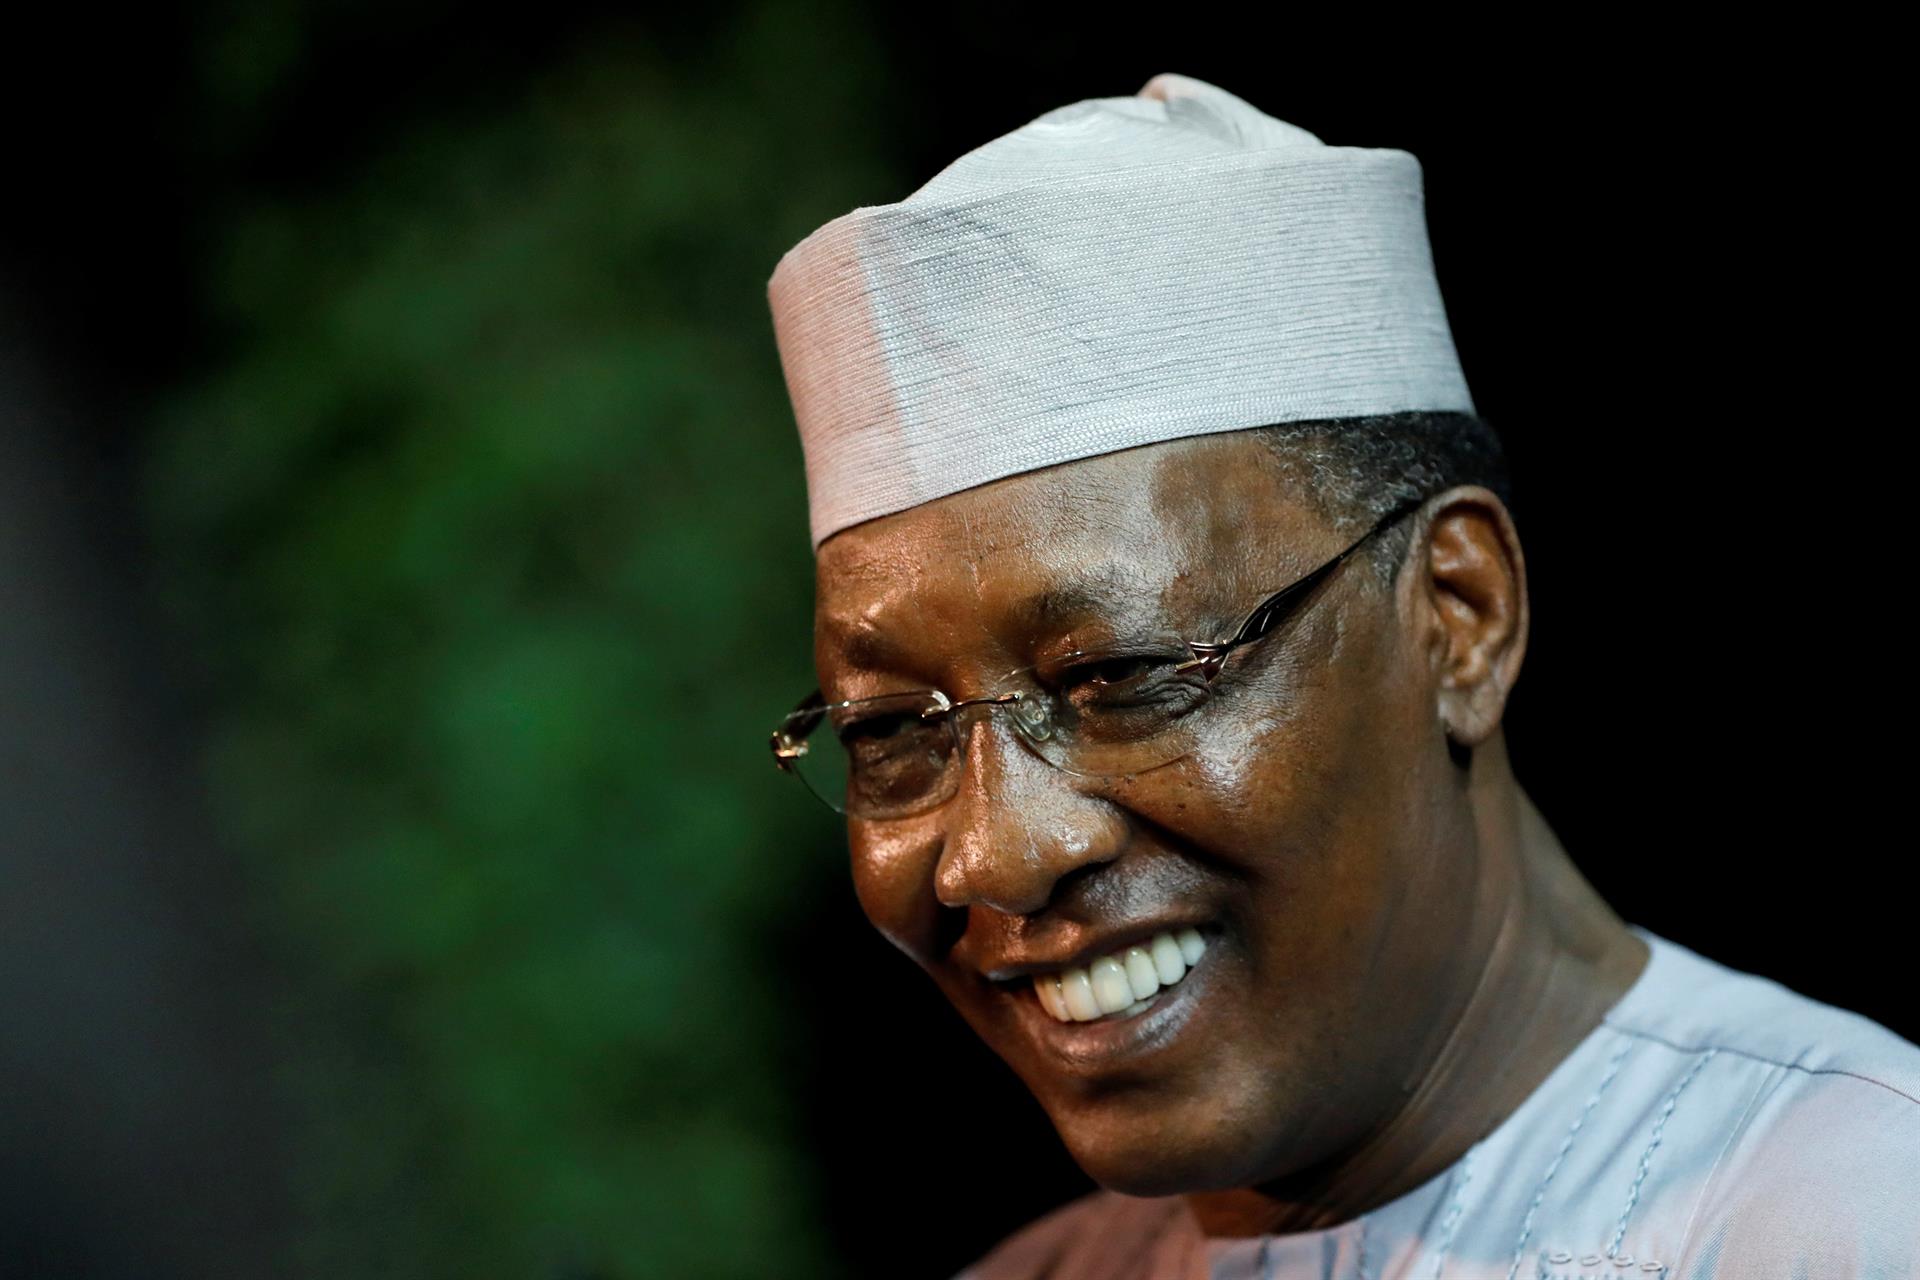 Presidente do Chade, Idriss Déby, morre após combater rebeldes